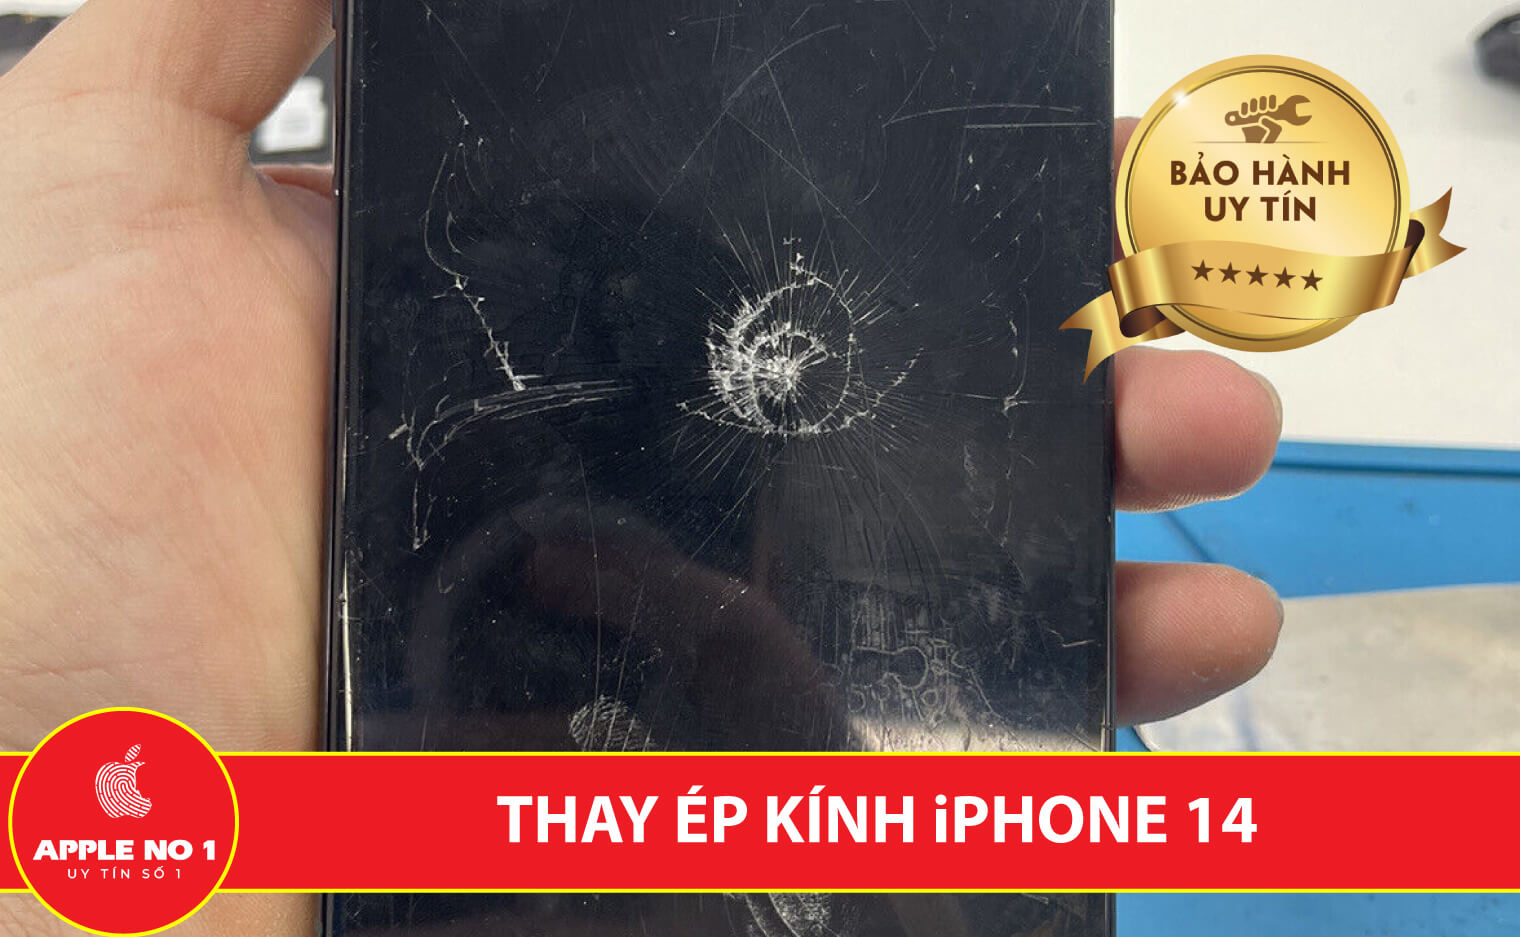 thay ep kinh iphone 14